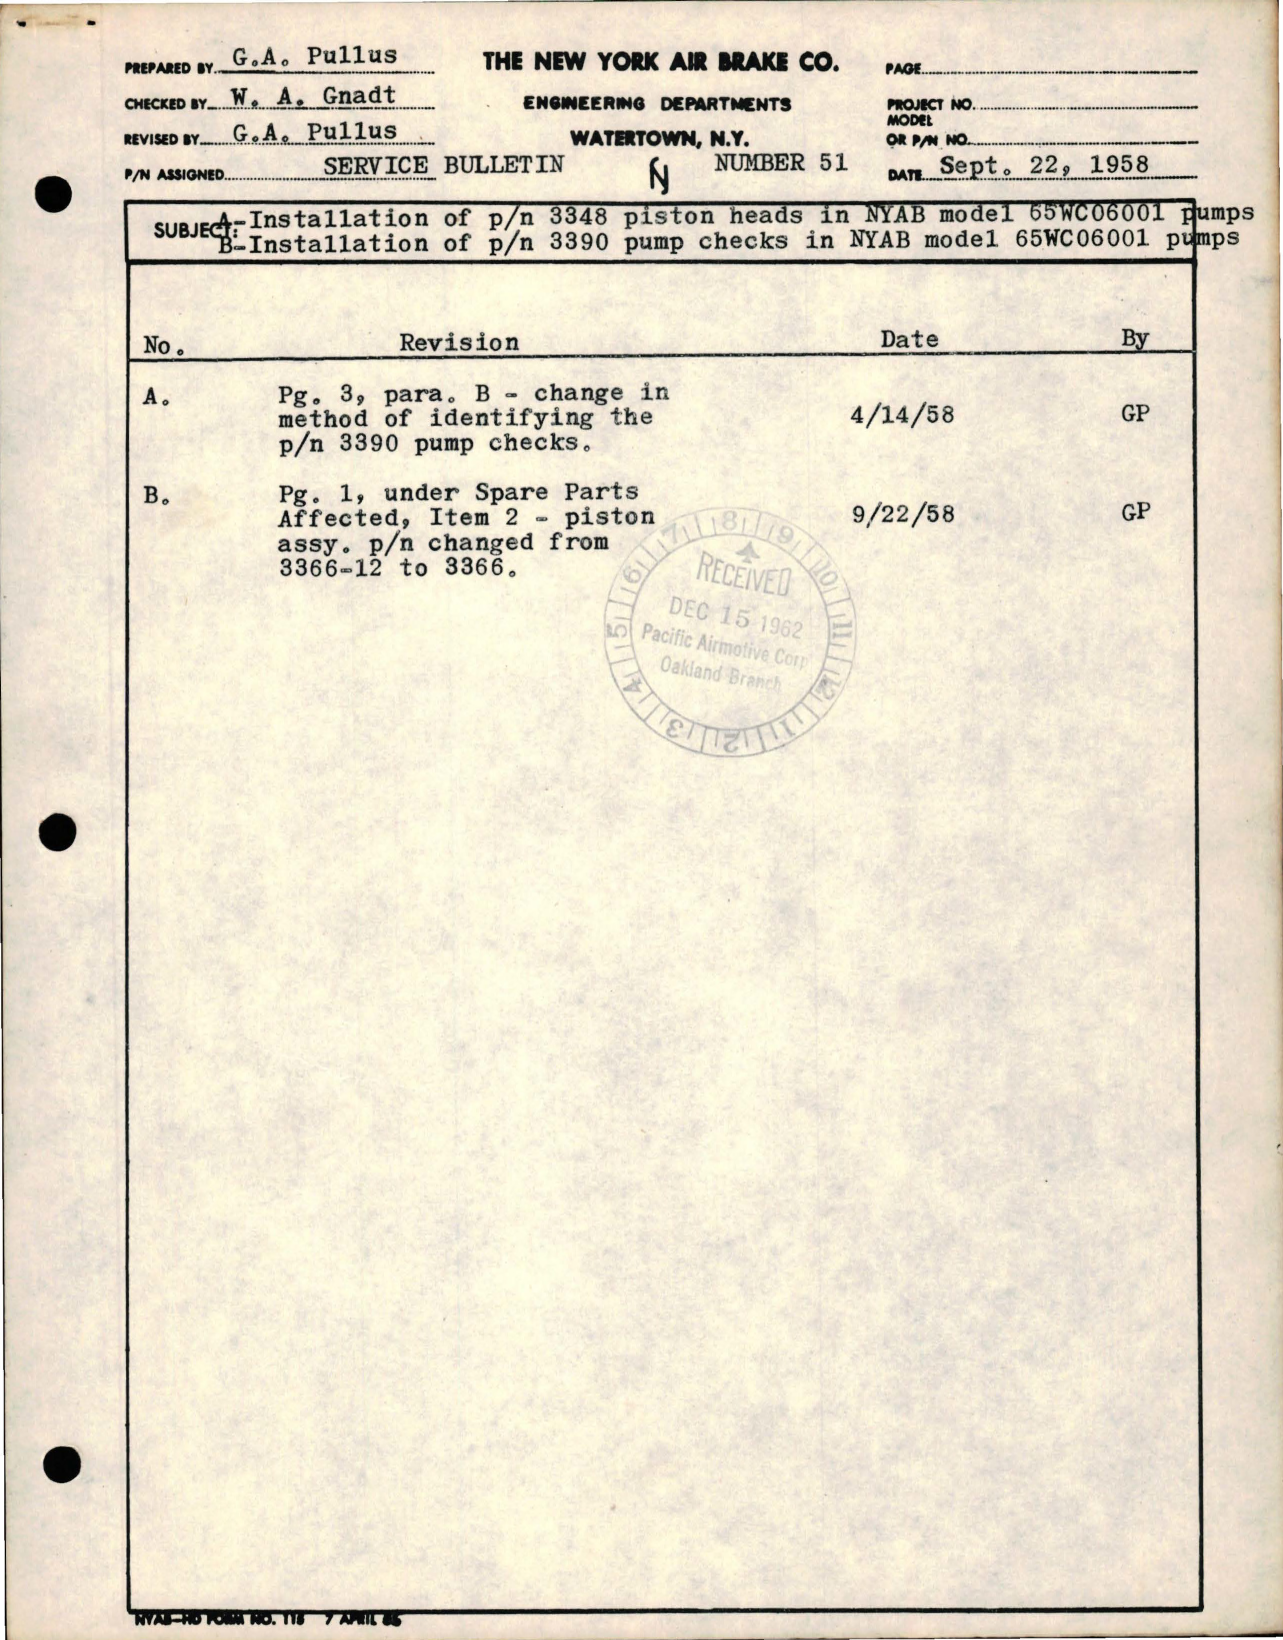 Sample page 1 from AirCorps Library document: Installation Piston Heads Part 3348 in Model 65WC06001, and Installation of Pump Check Part 3390 in Model 65WC06001 Pumps